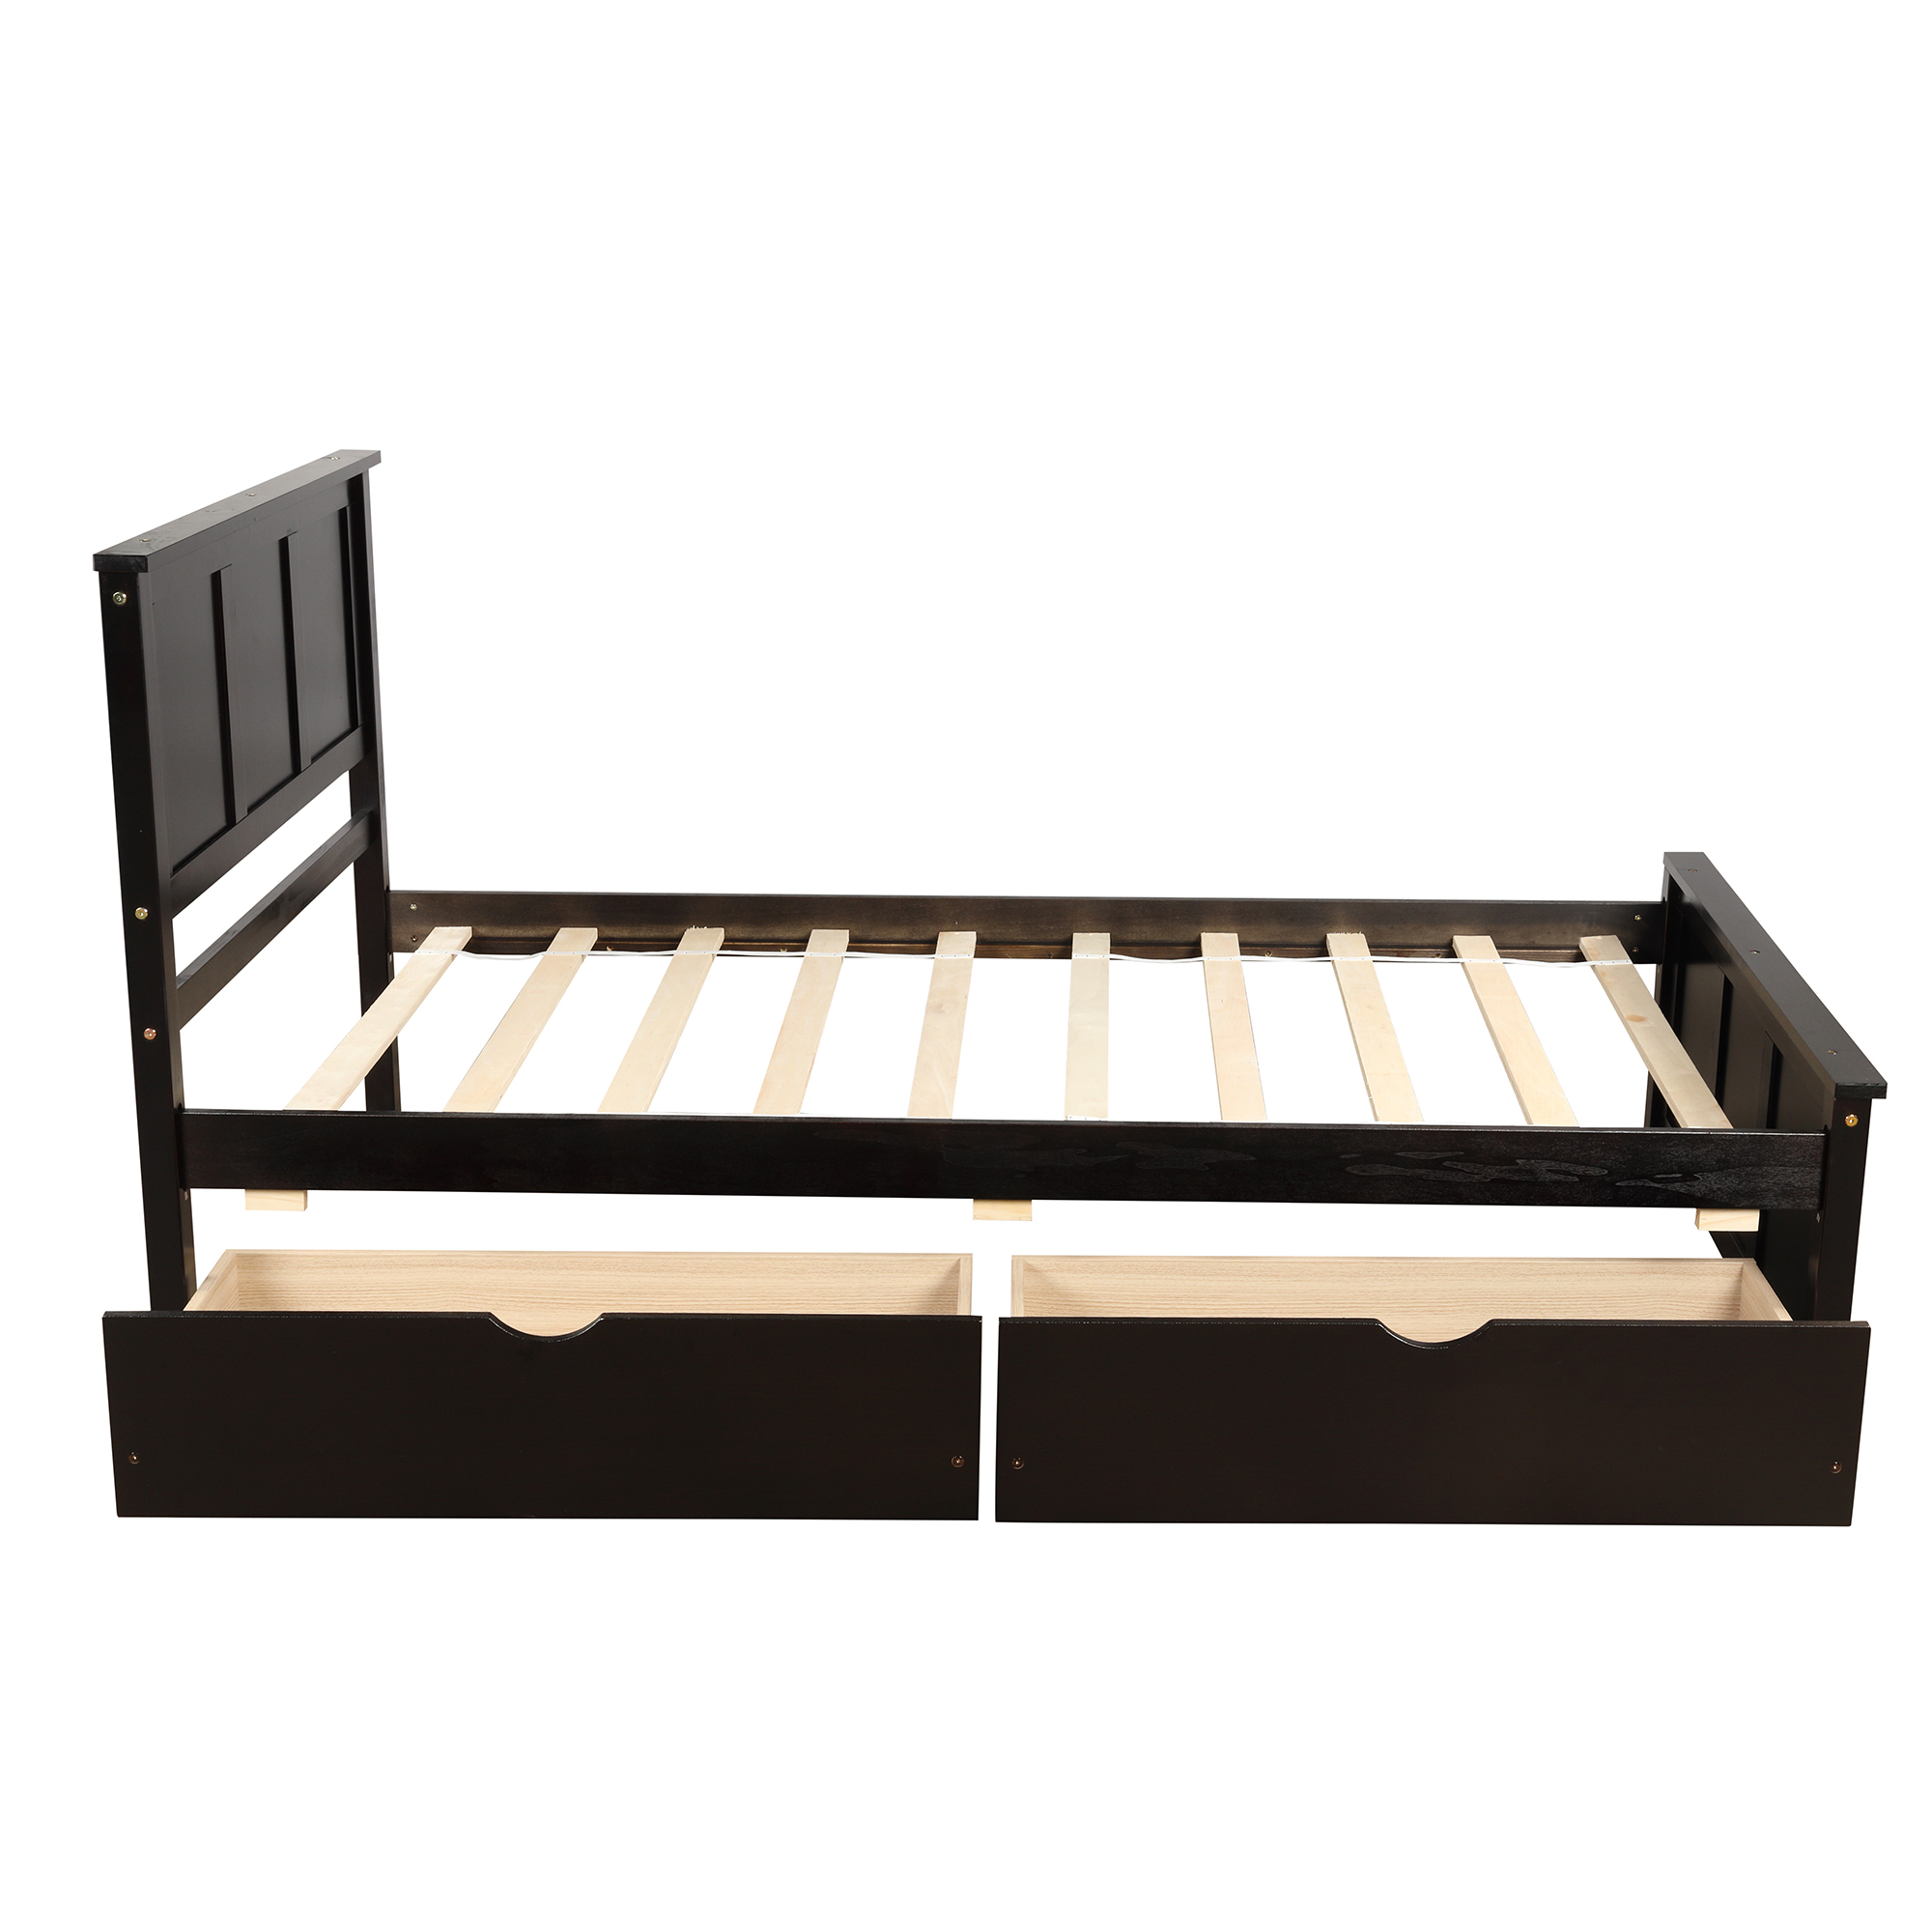 Euroco Wood Twin Platform Bed with Headboard & 2 Storage Drawers for Kids, Espresso - image 4 of 10